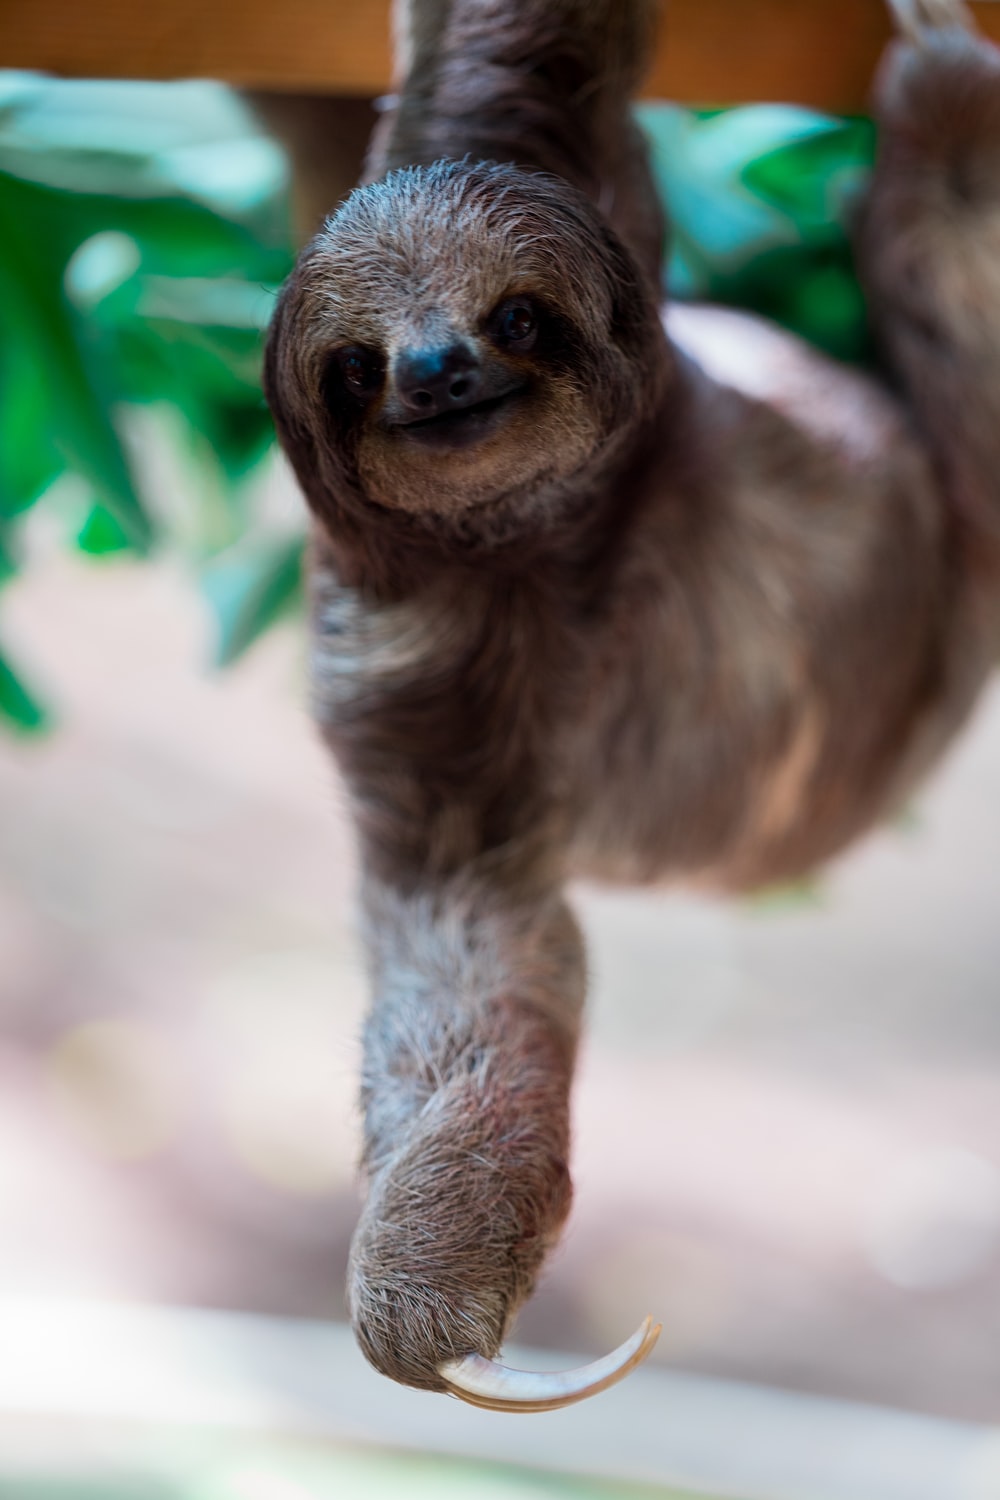 Three Toed Sloth Pictures Image